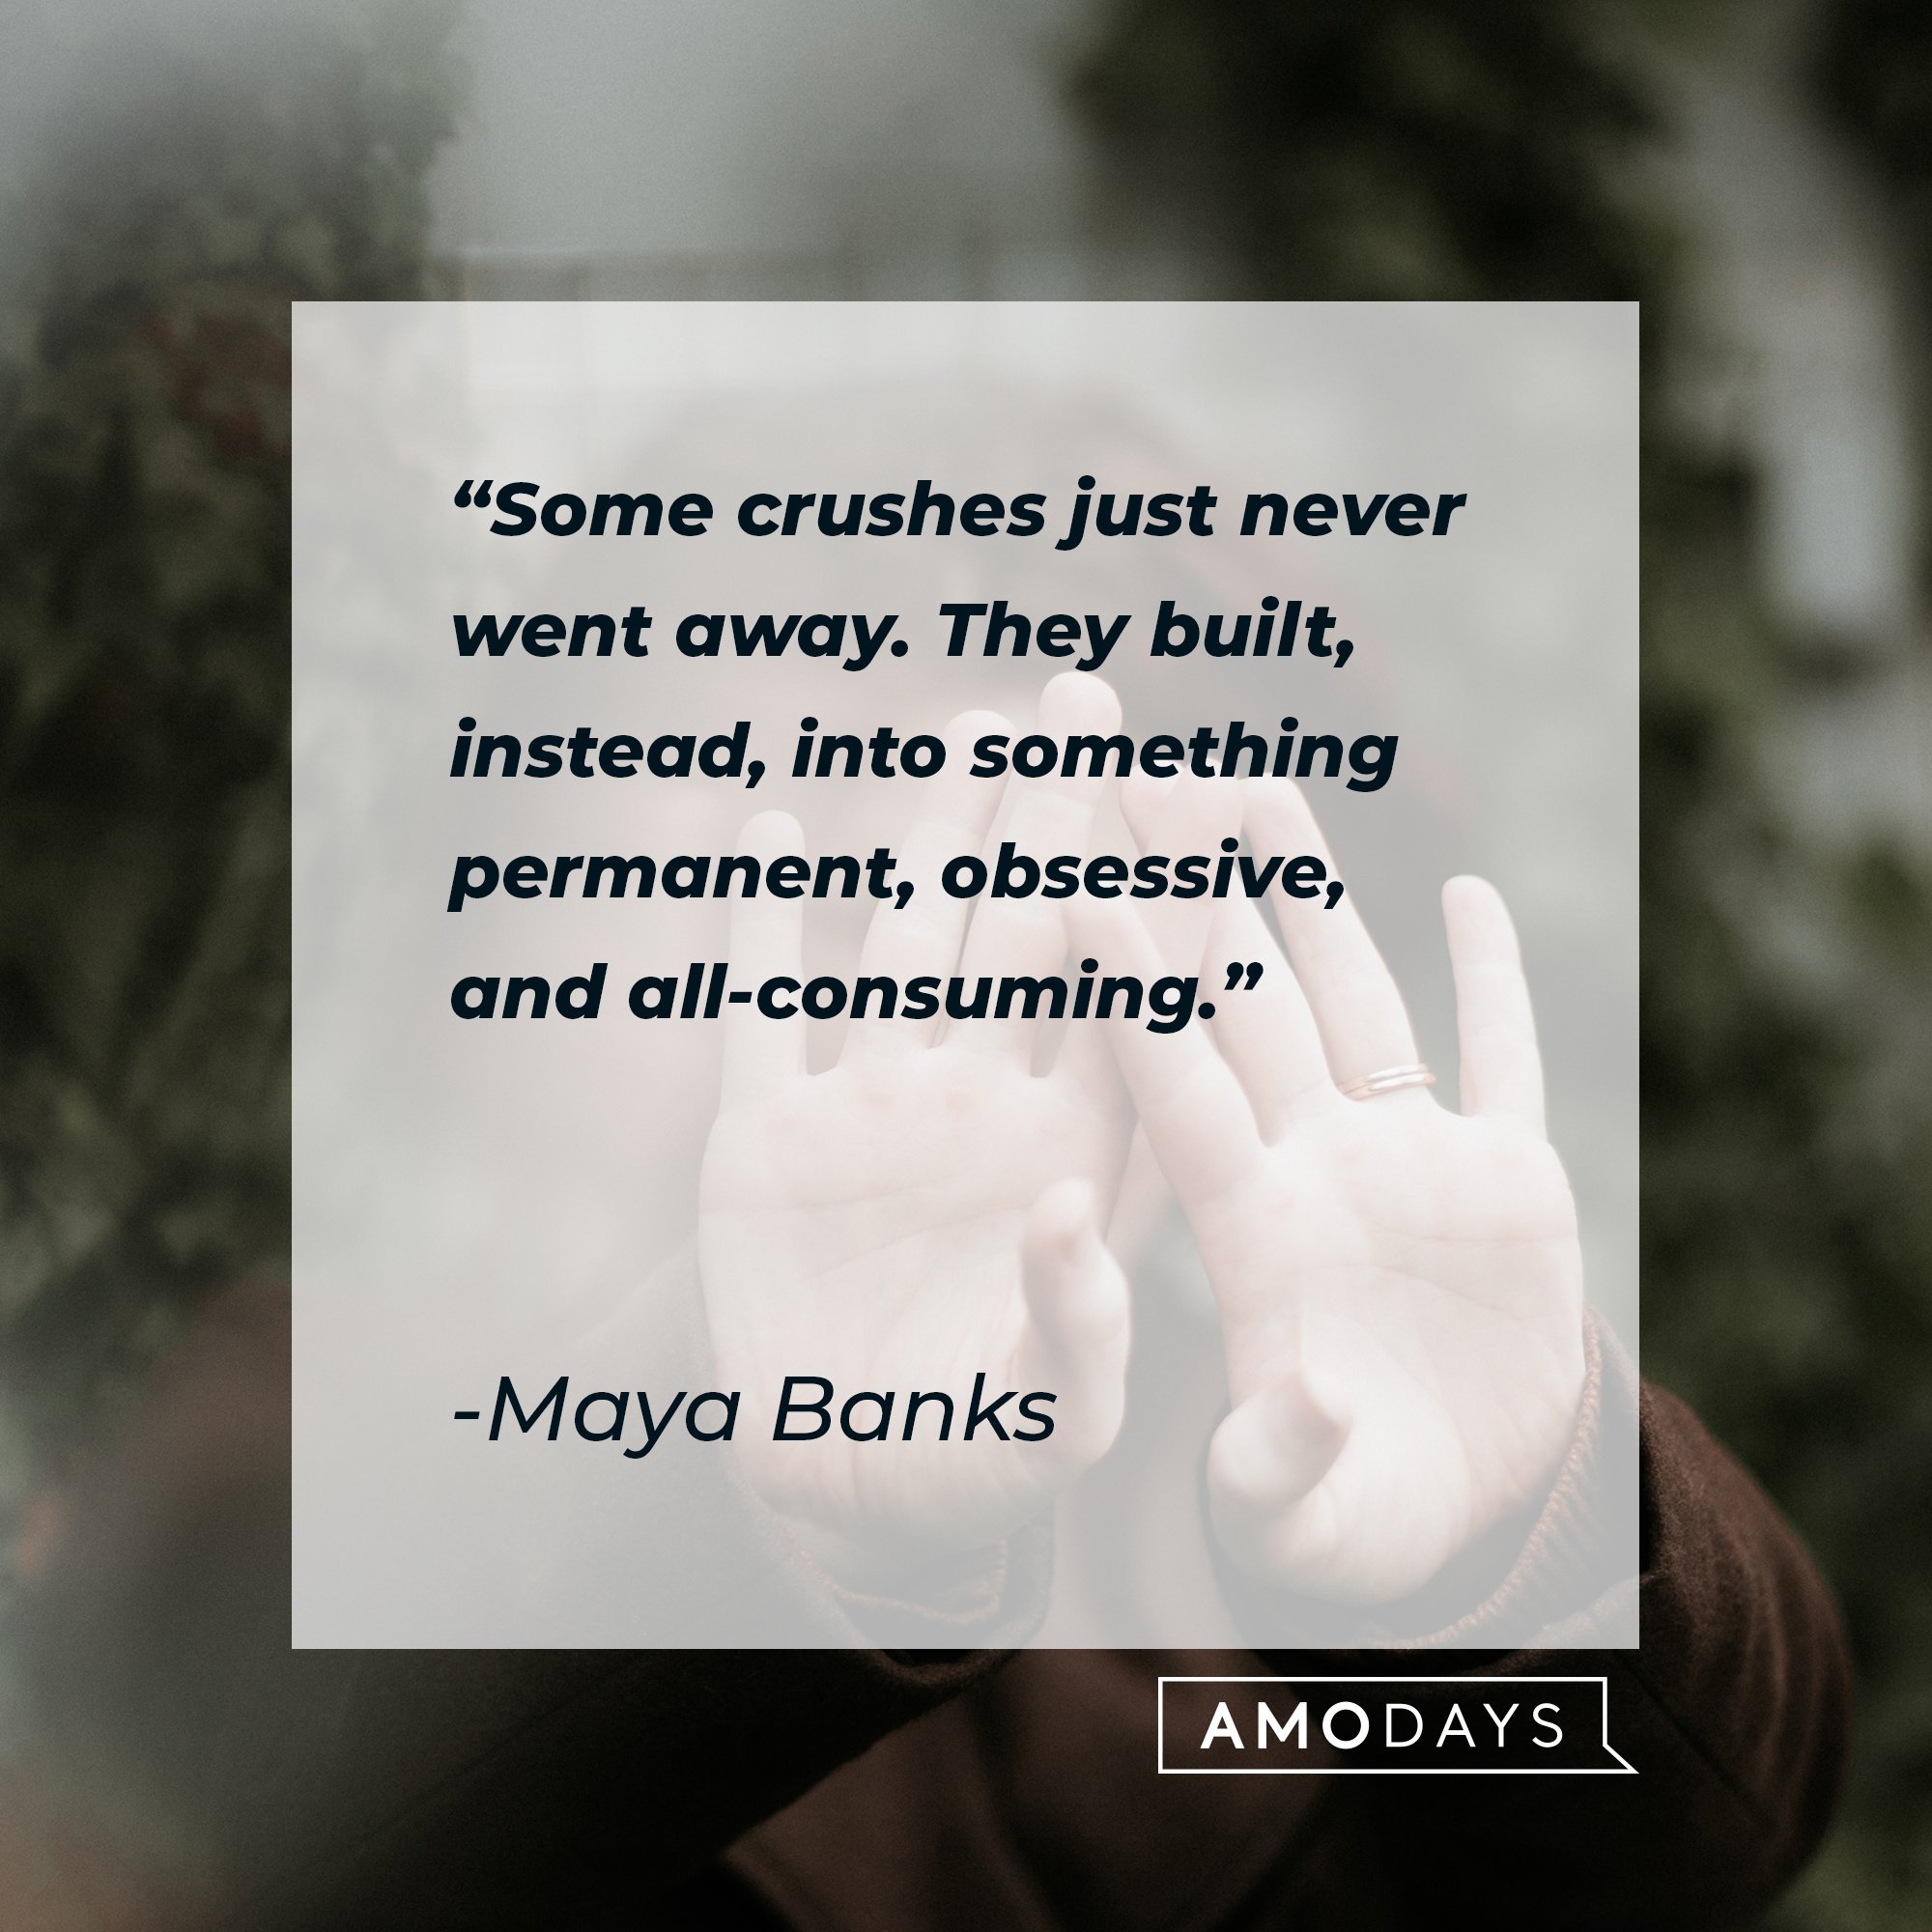 Maya Banks' quote: ”Some crushes just never went away. They built, instead, into something permanent, obsessive, and all-consuming.” | Image: AmoDays